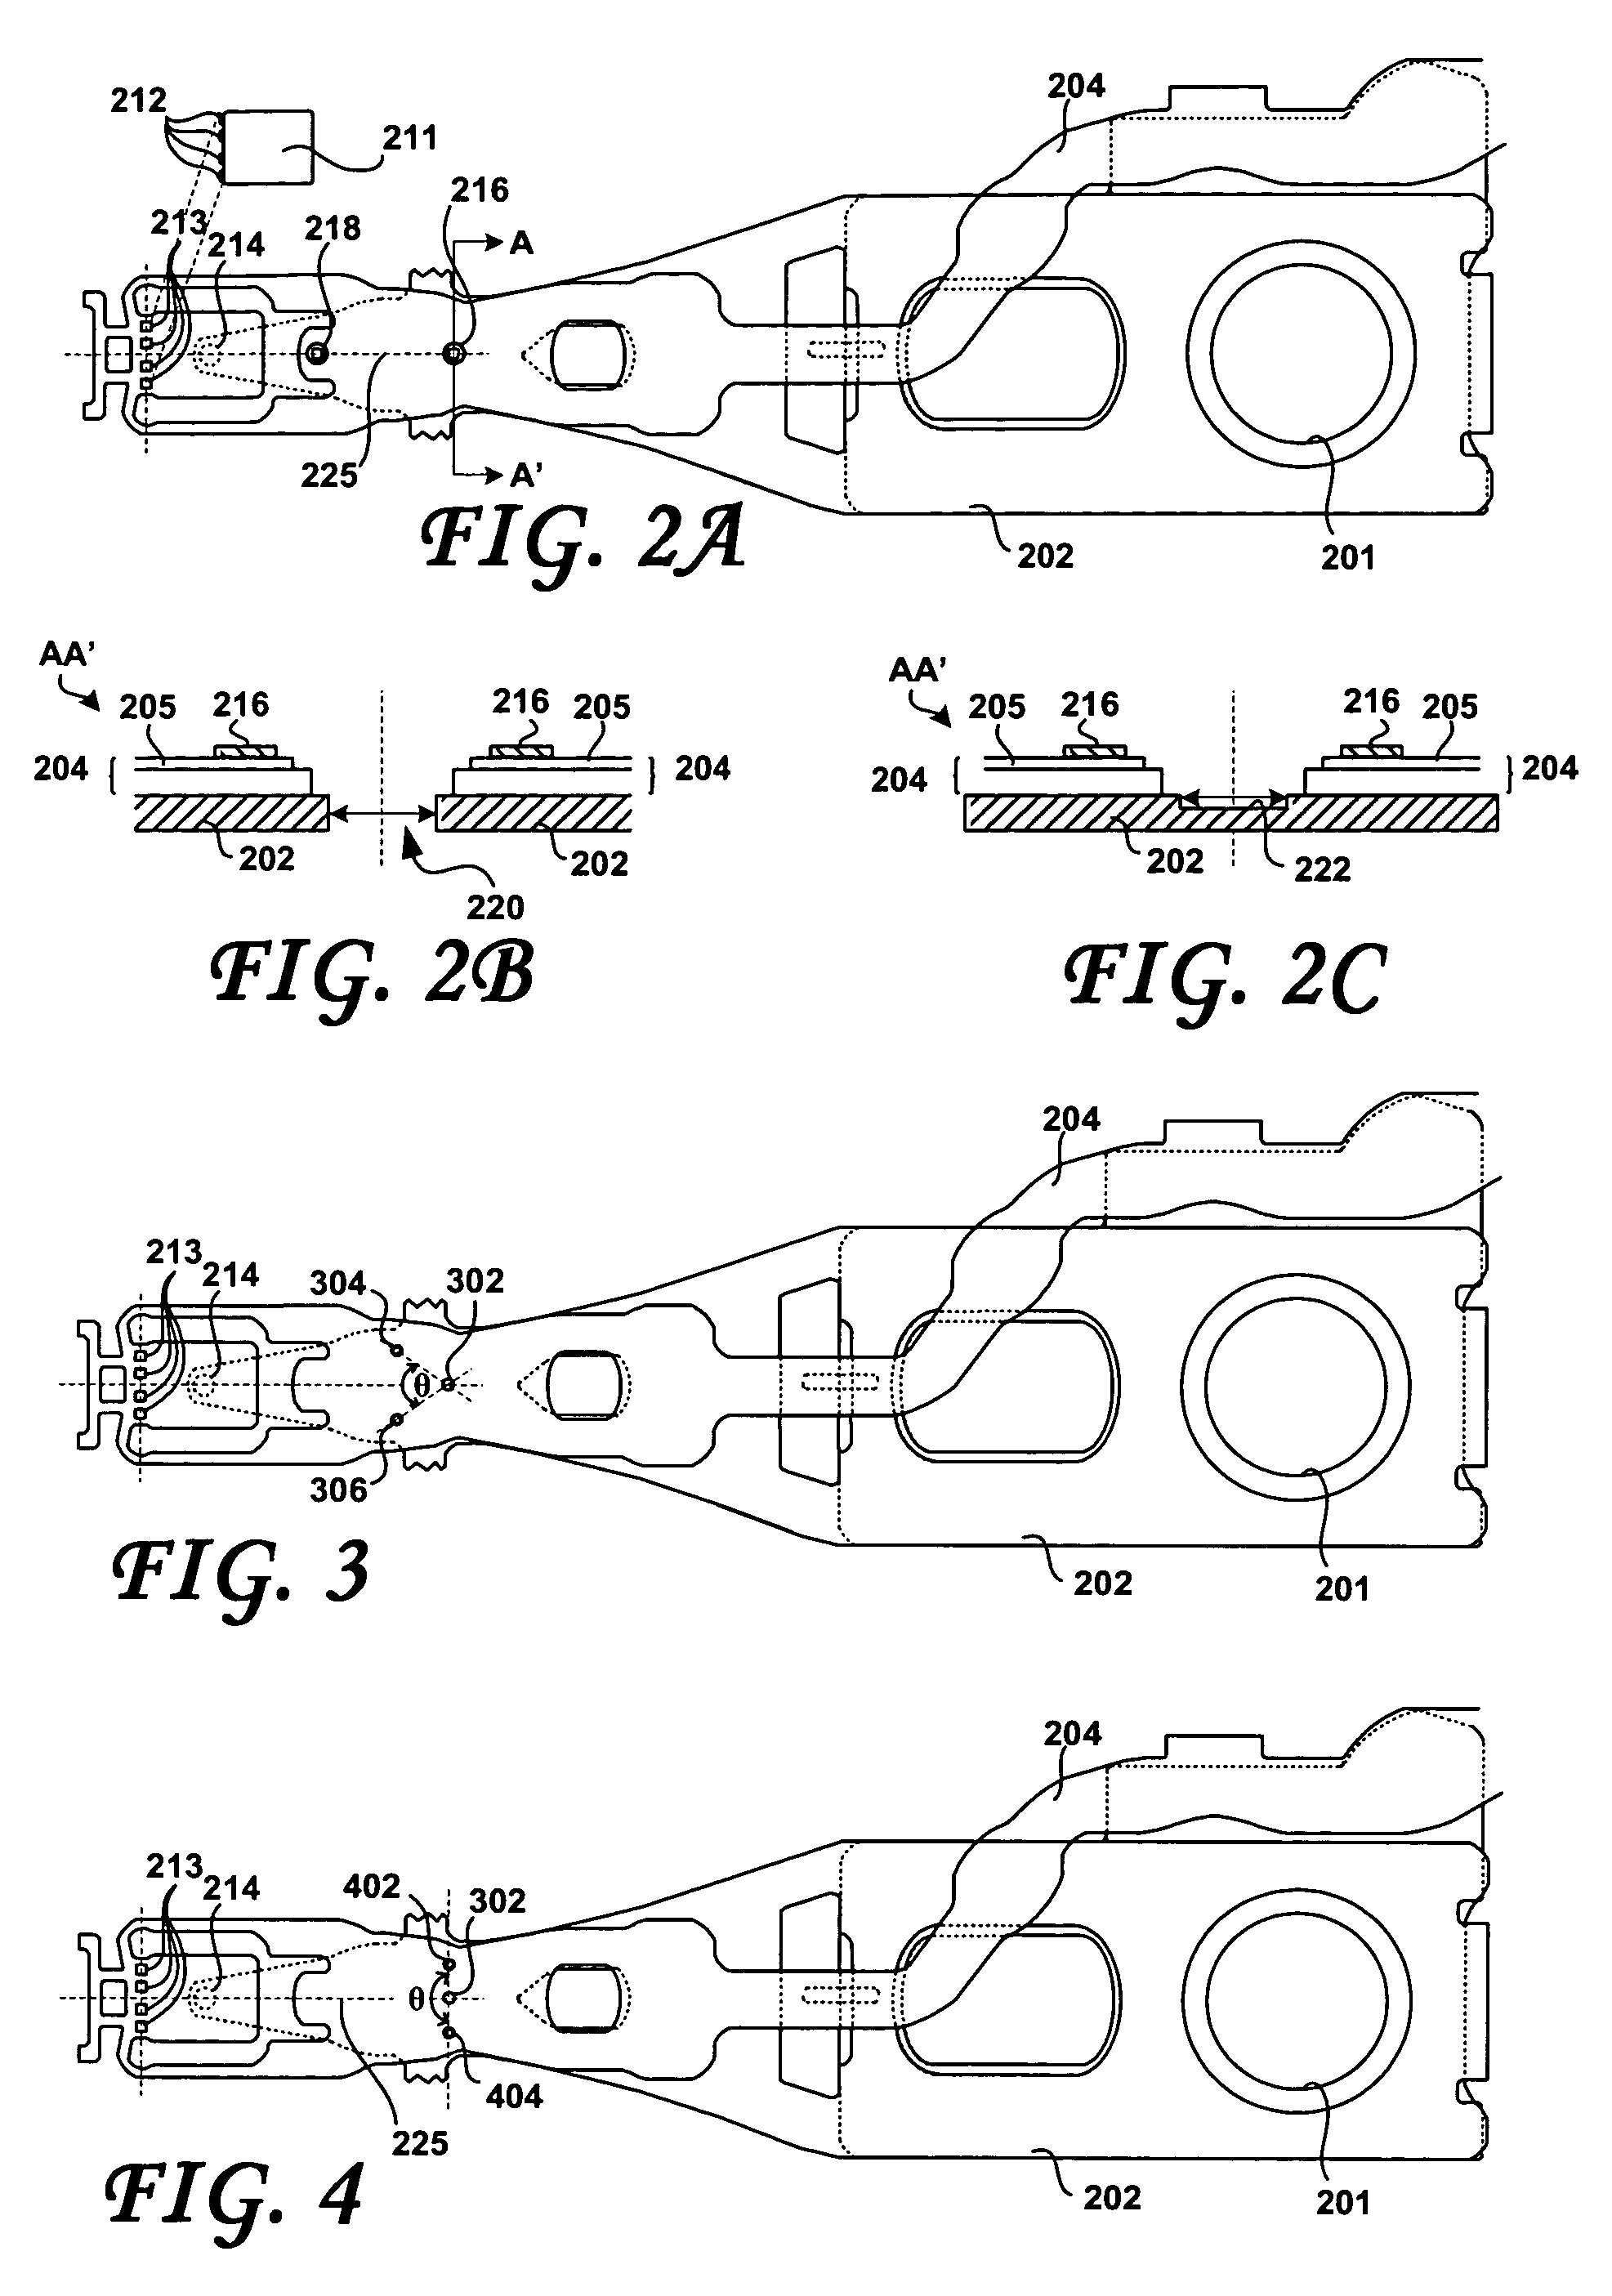 Disk drives, head stack, head gimbal and suspension assemblies having positional conductive features